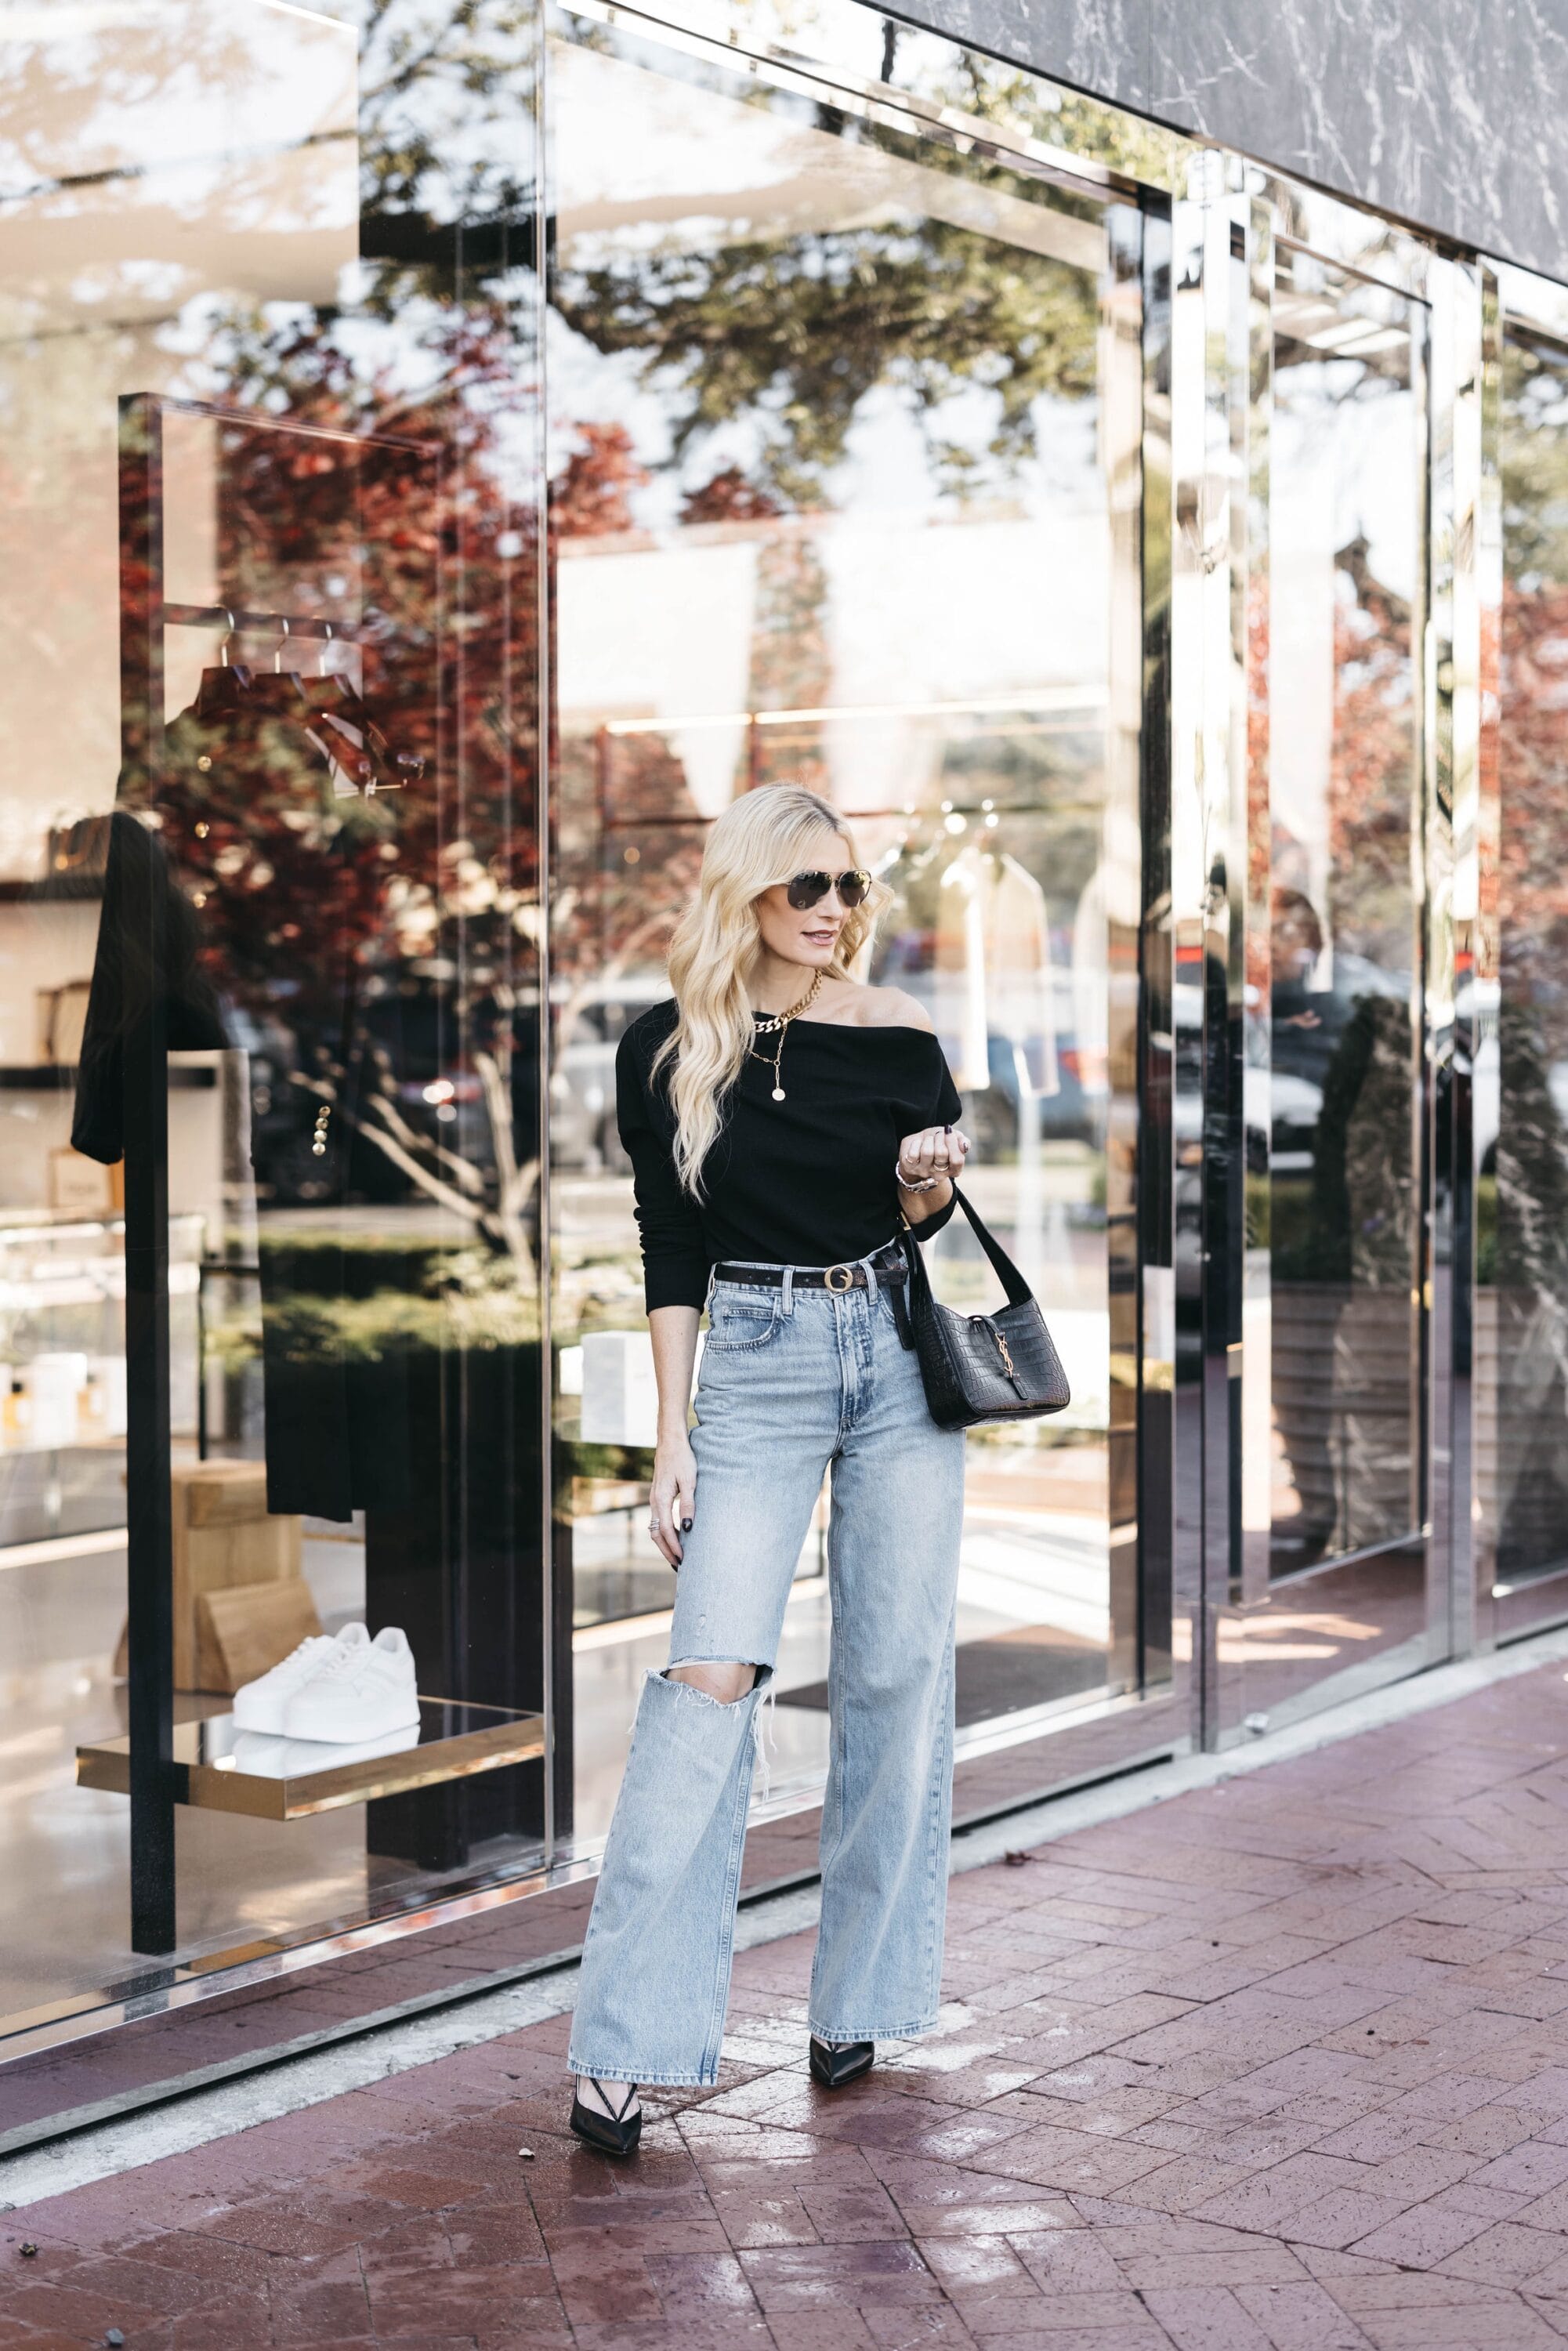 Over 40 dallas influencer wearing baggy denim with a black off the shoulder top as how to style baggy jeans.